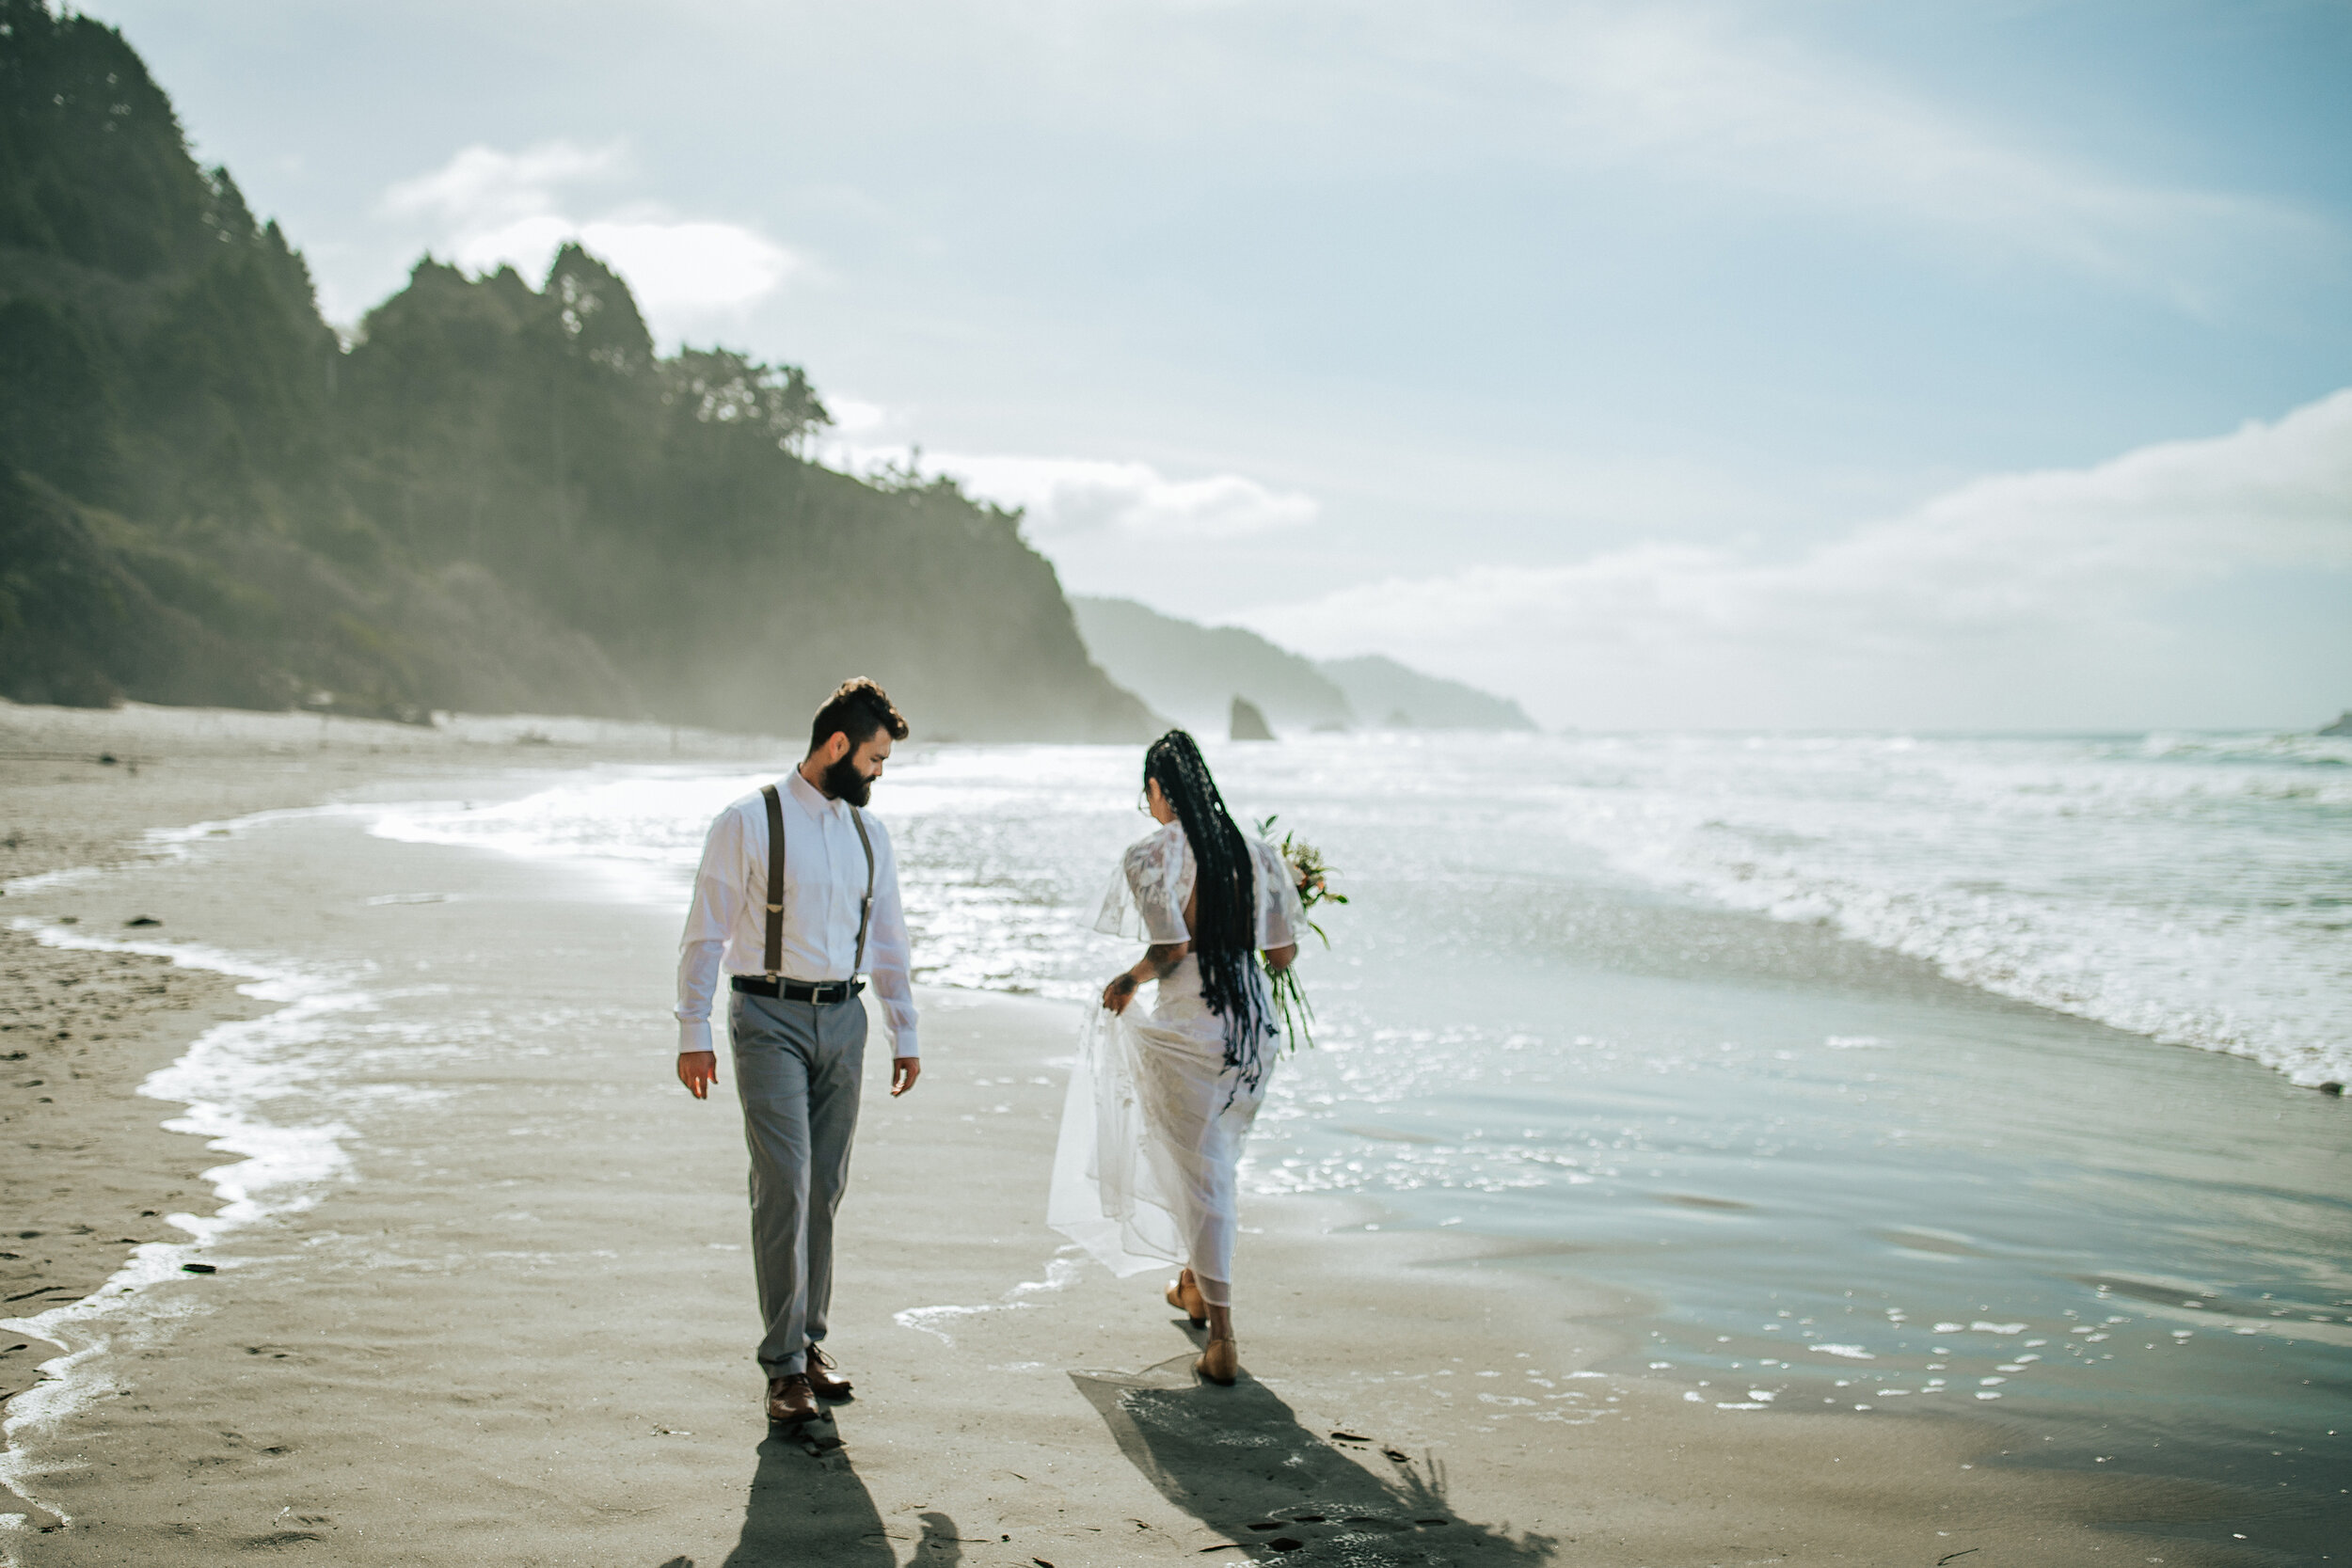  A beautiful couple walk by each other on the Oregon Coast in a stunningly bright and airy elopement photo shoot by professional photographer Emily Jenkins Photography. Couple goals elopement photo shoot goals elopement inspiration elopement photo sh